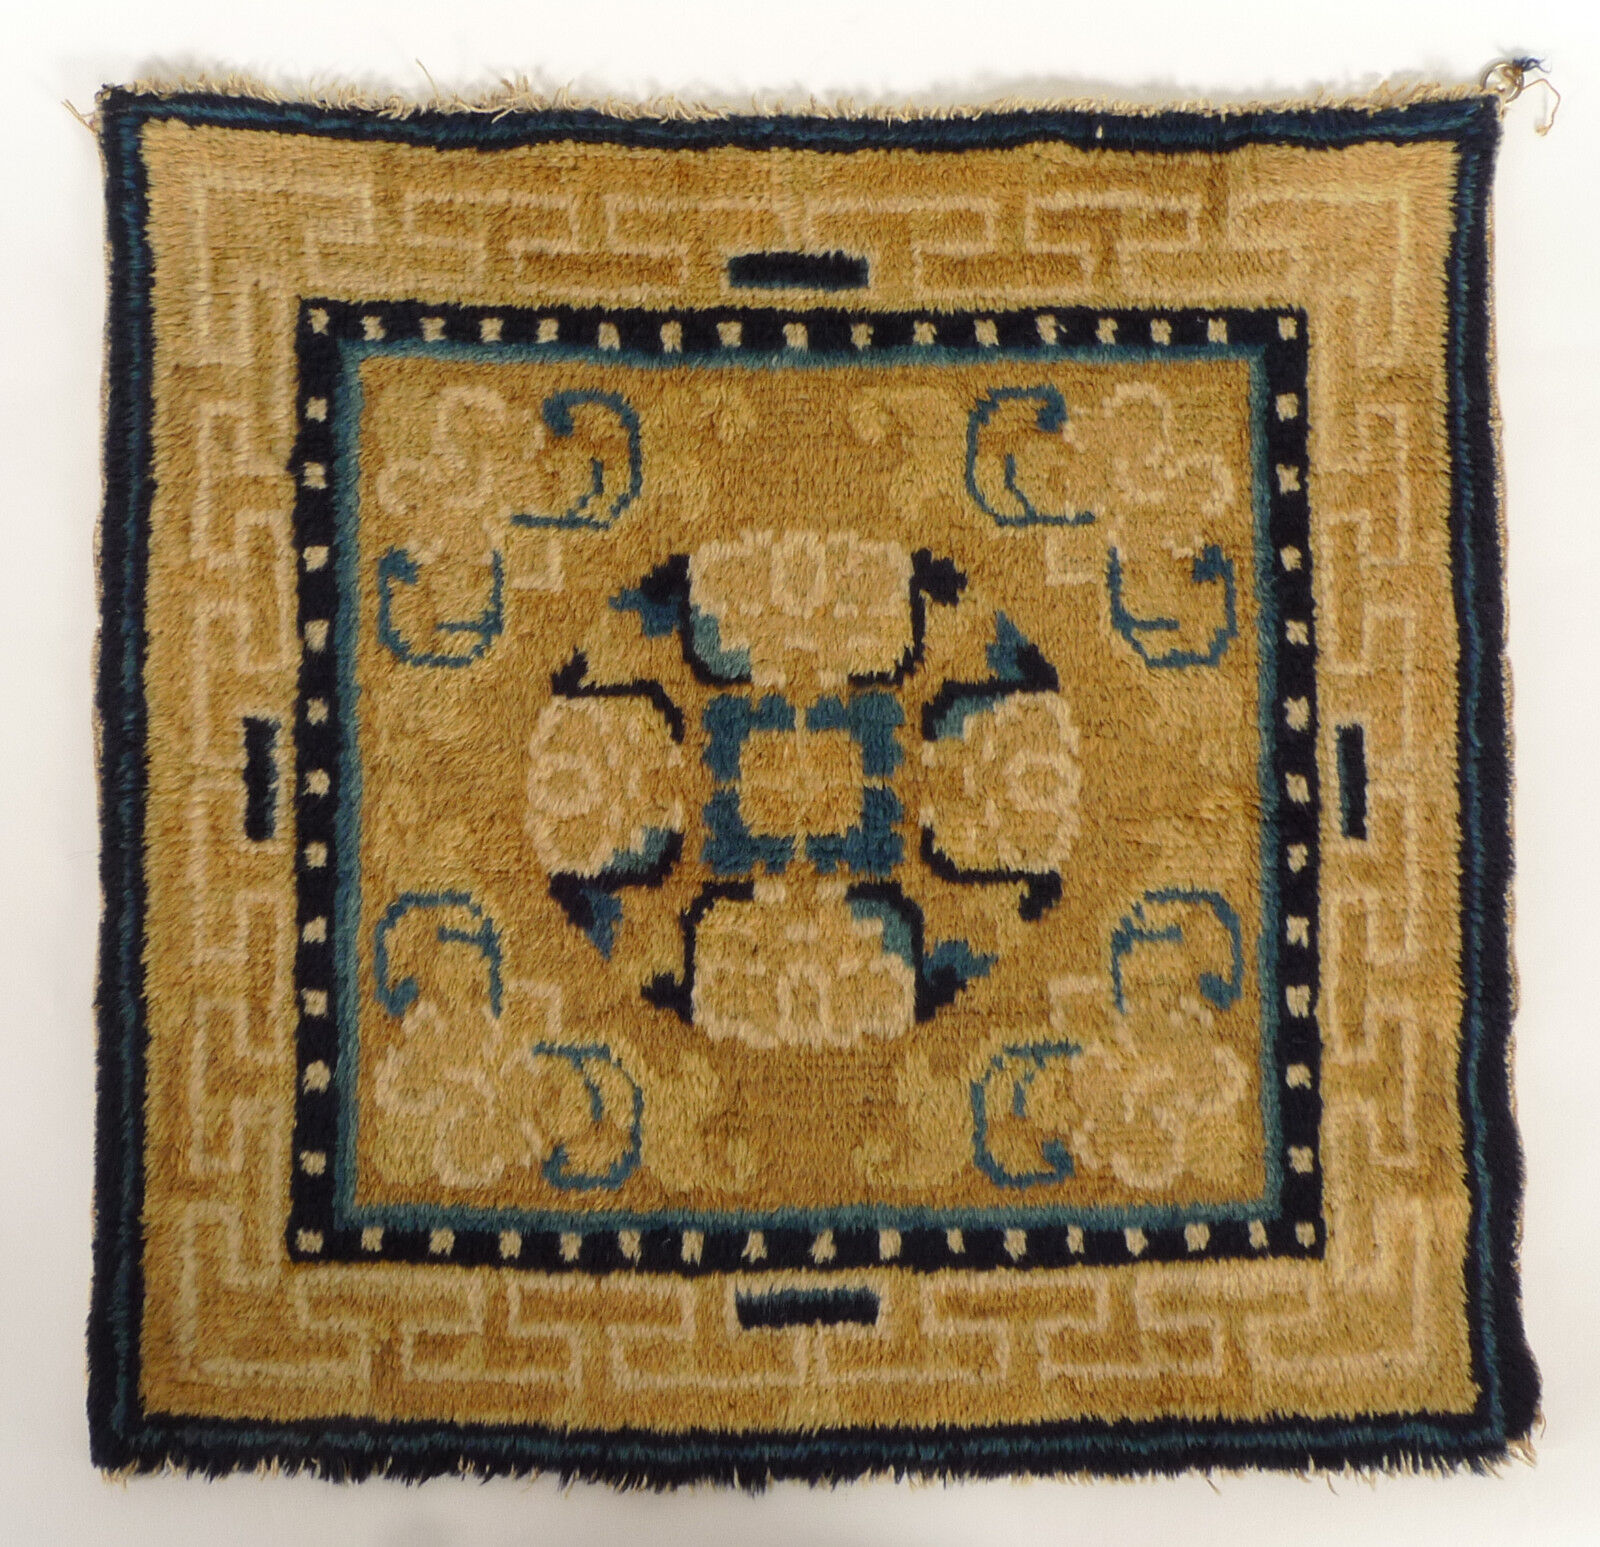 A Very Soft Ningxia Cover, First Half of 19th Century, Tibetan, Chinese Rug